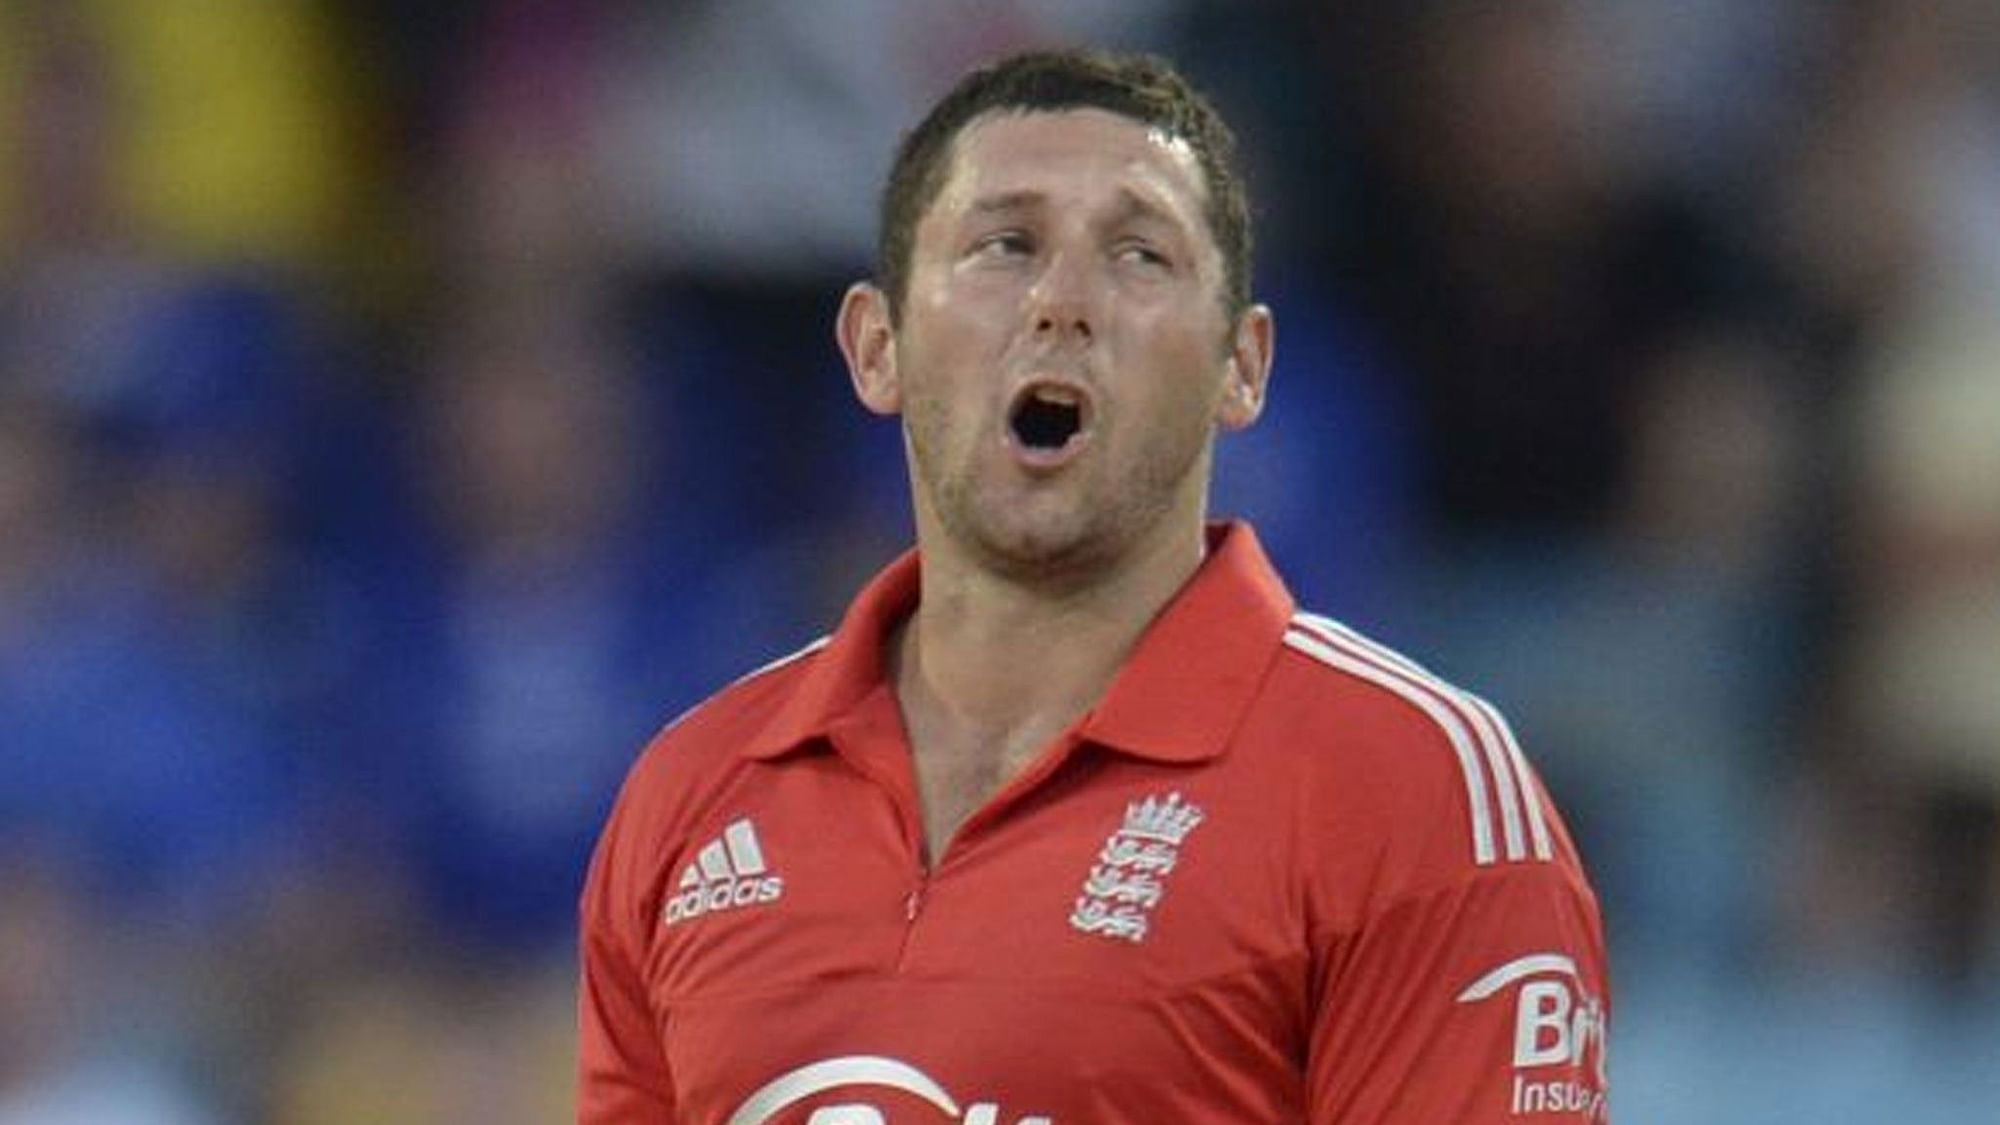 Tim Bresnan has said he and umpire Rod Tucker received death threats after a Sachin wicket in 2011. 